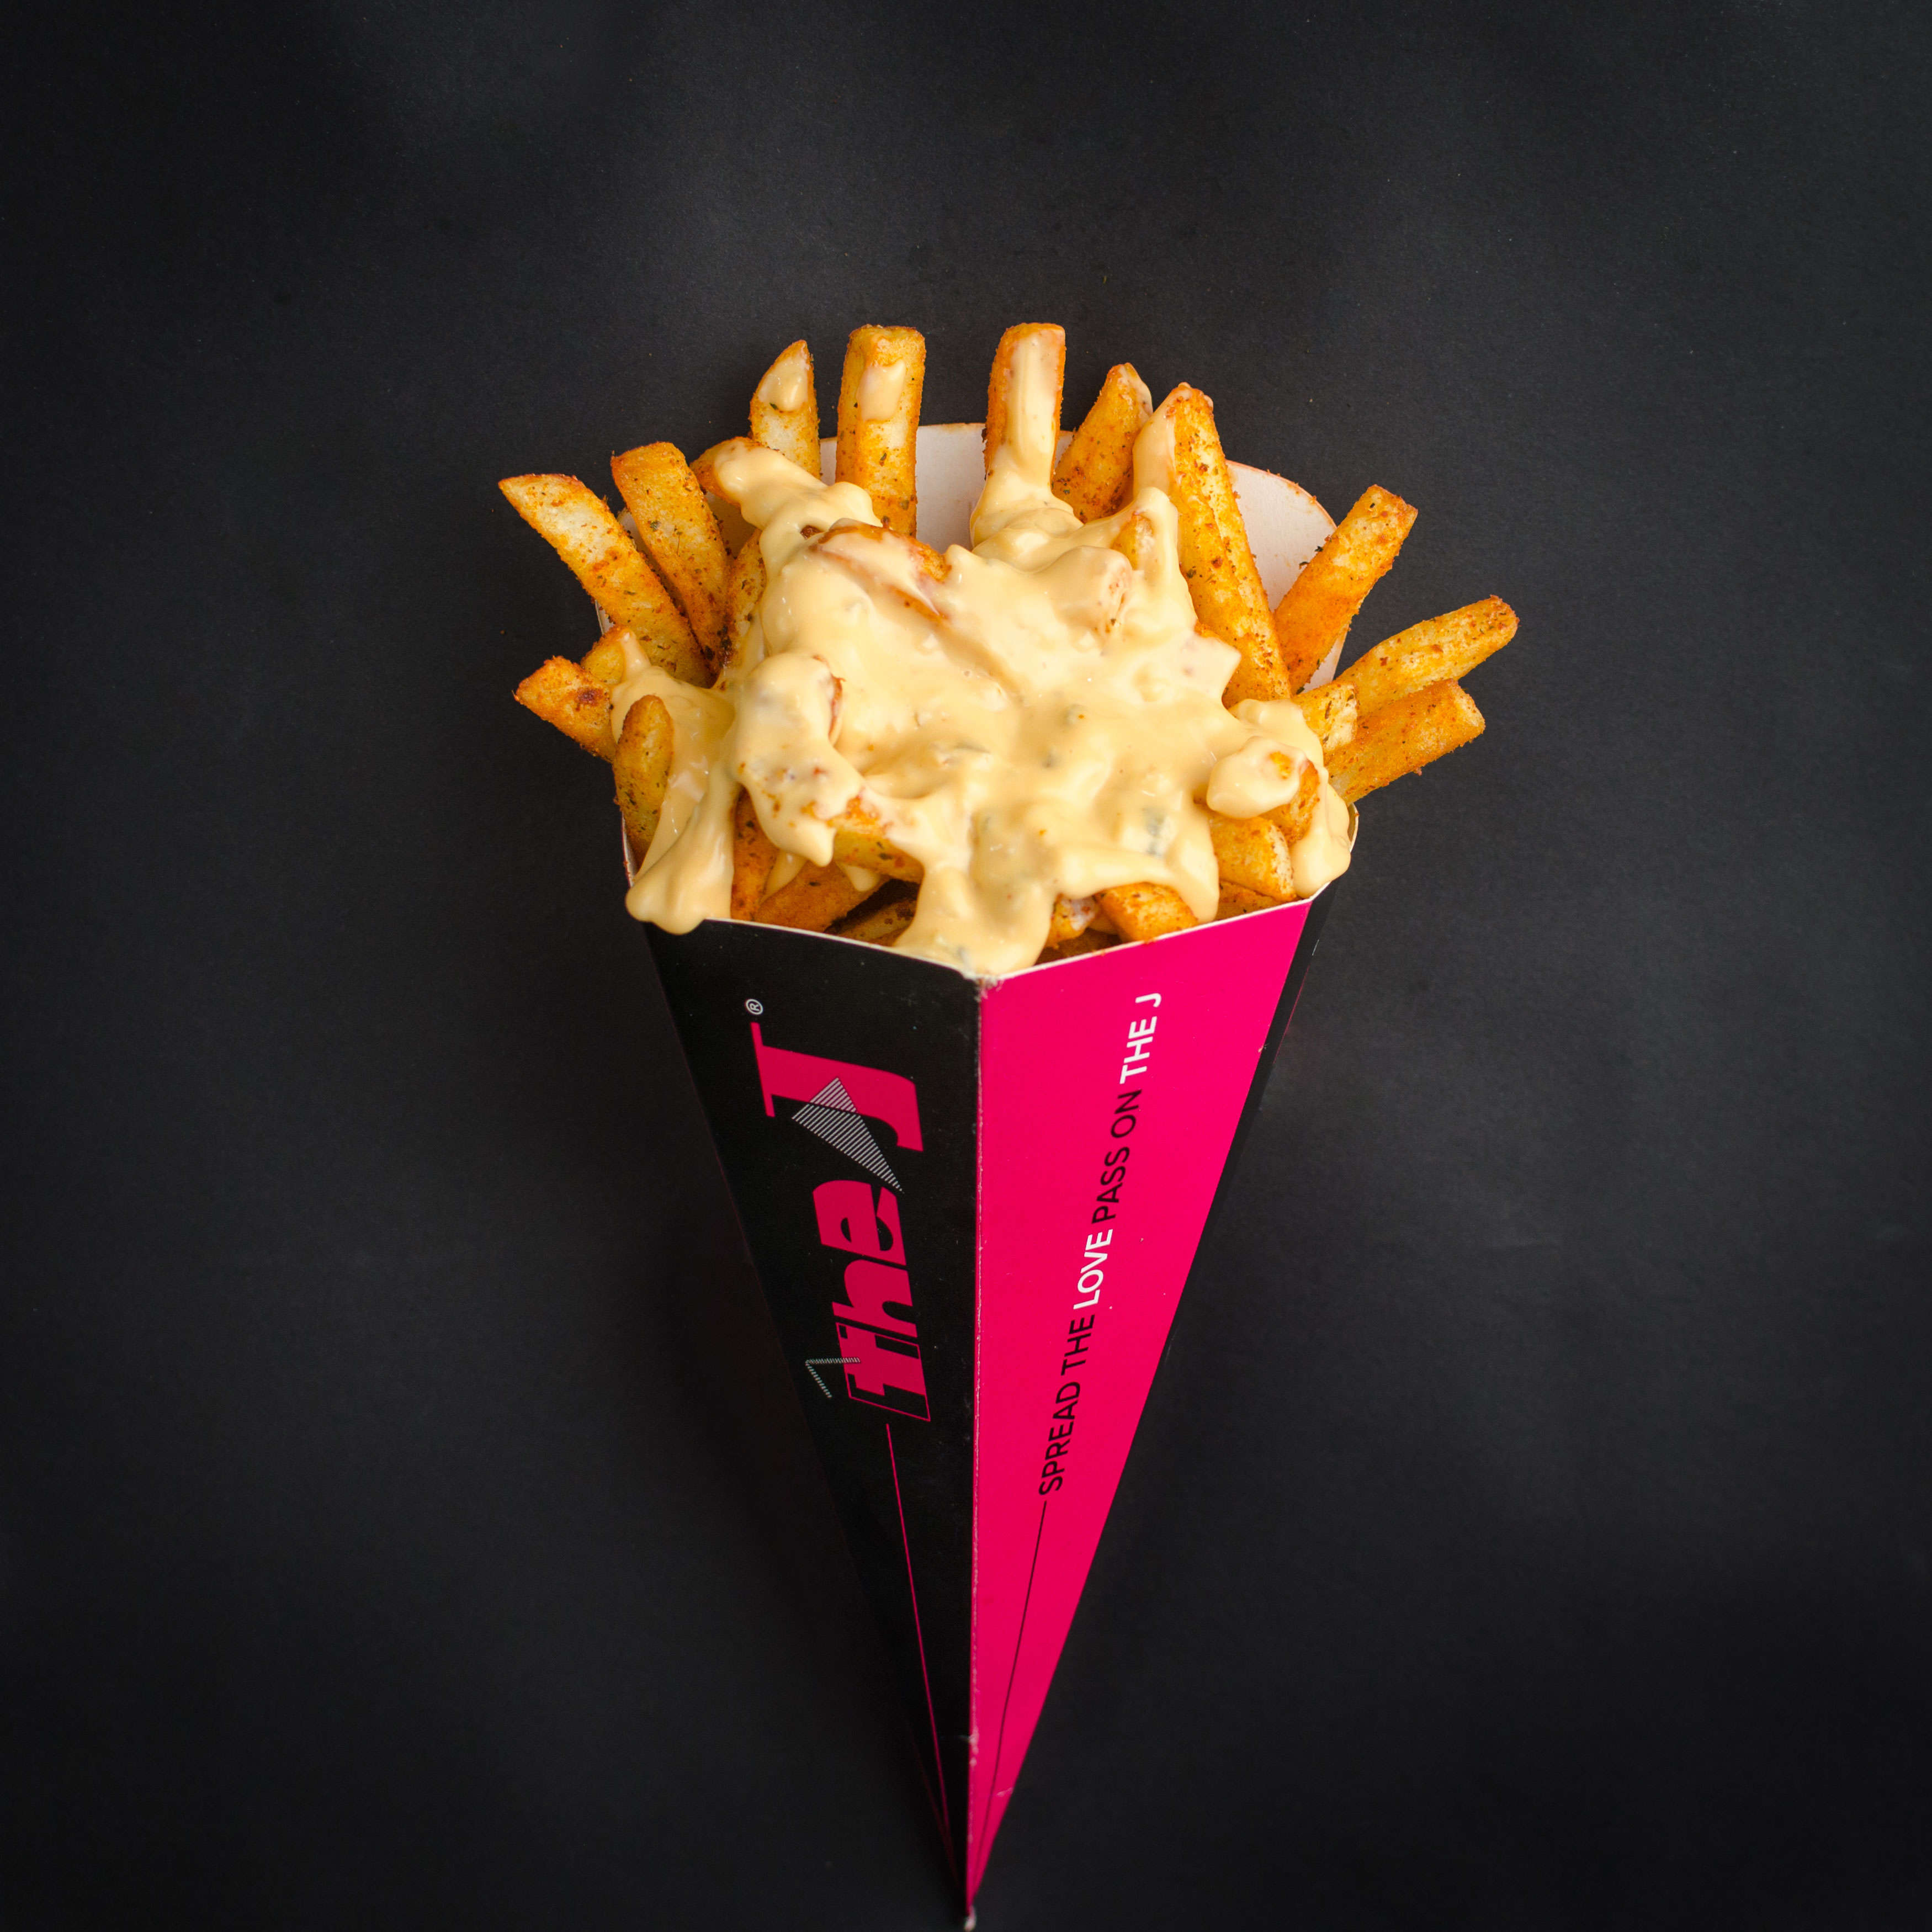 French fries and milkshake QSR chain to launch pocket-friendly